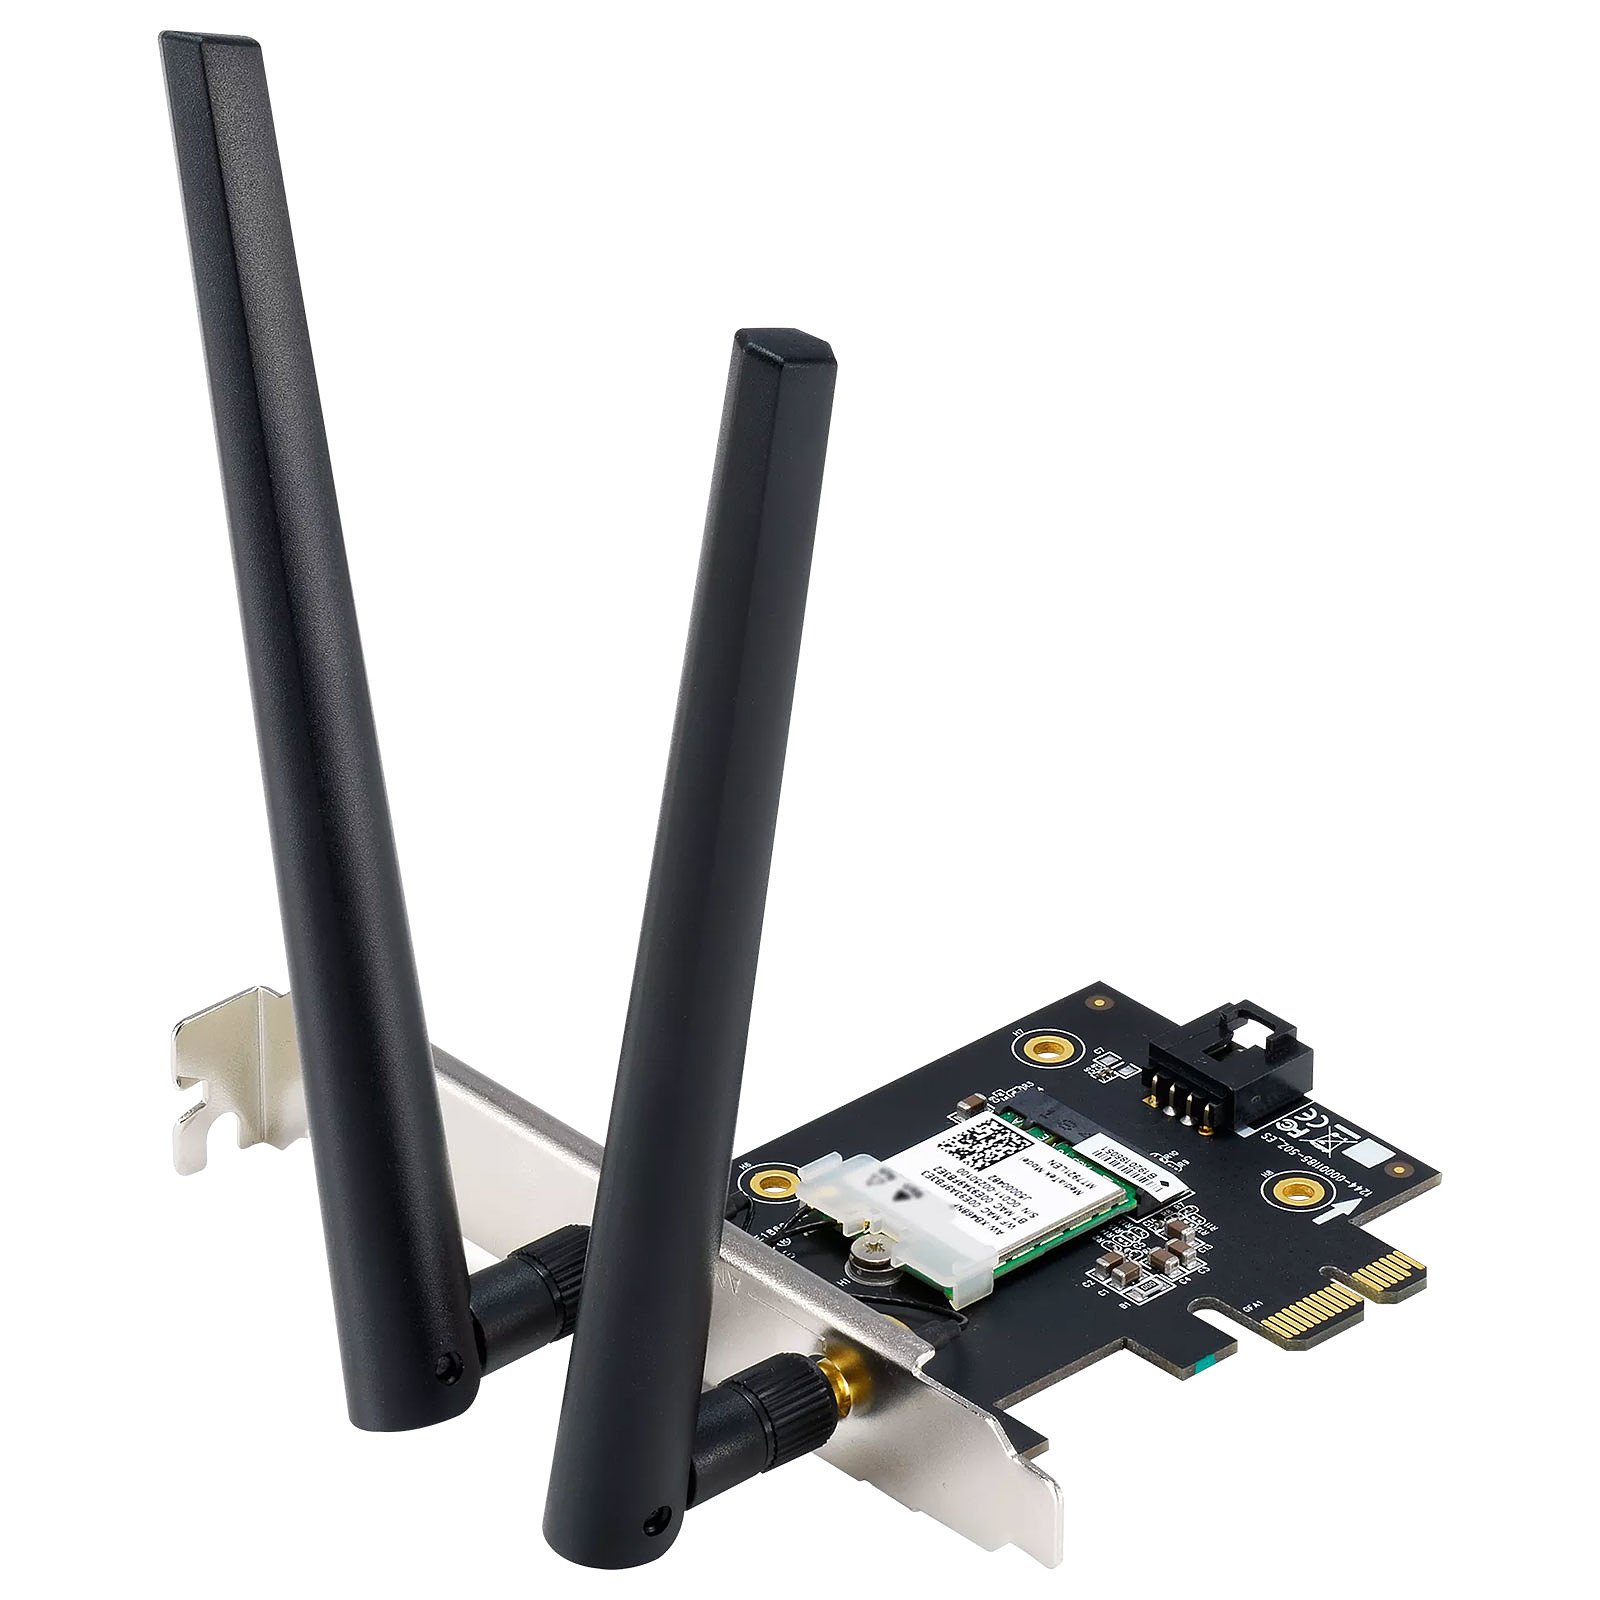 Carte WiFi PCI-Express 11n 300Mbps Tp-link TL-WN881ND - Achat